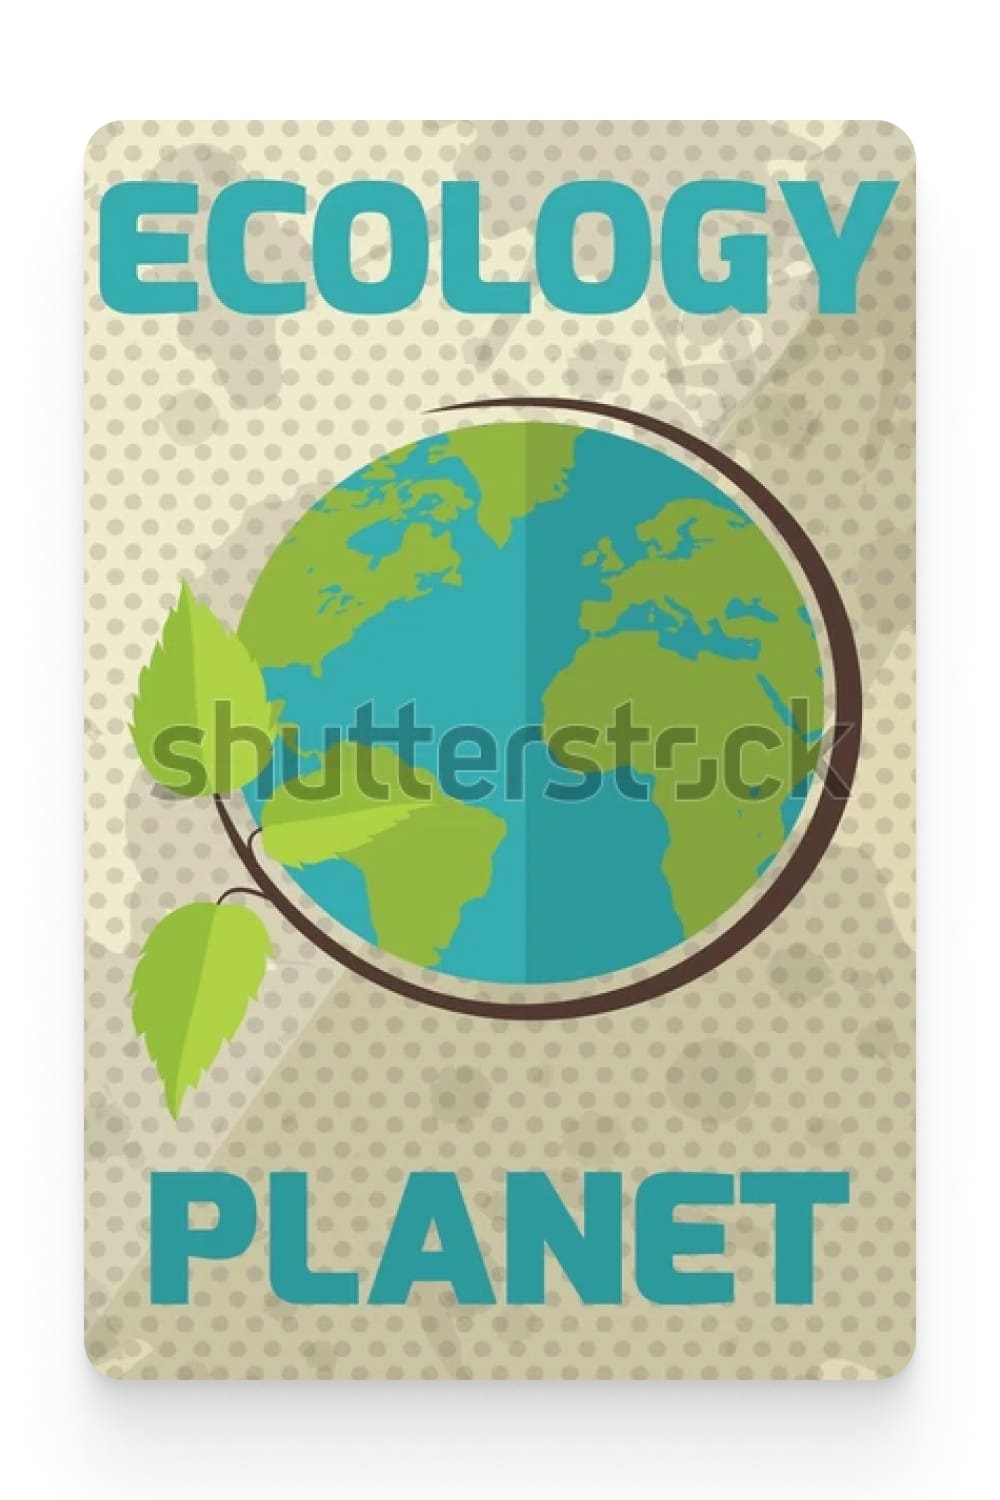 Planet Earth entwined with a branch with leaves.